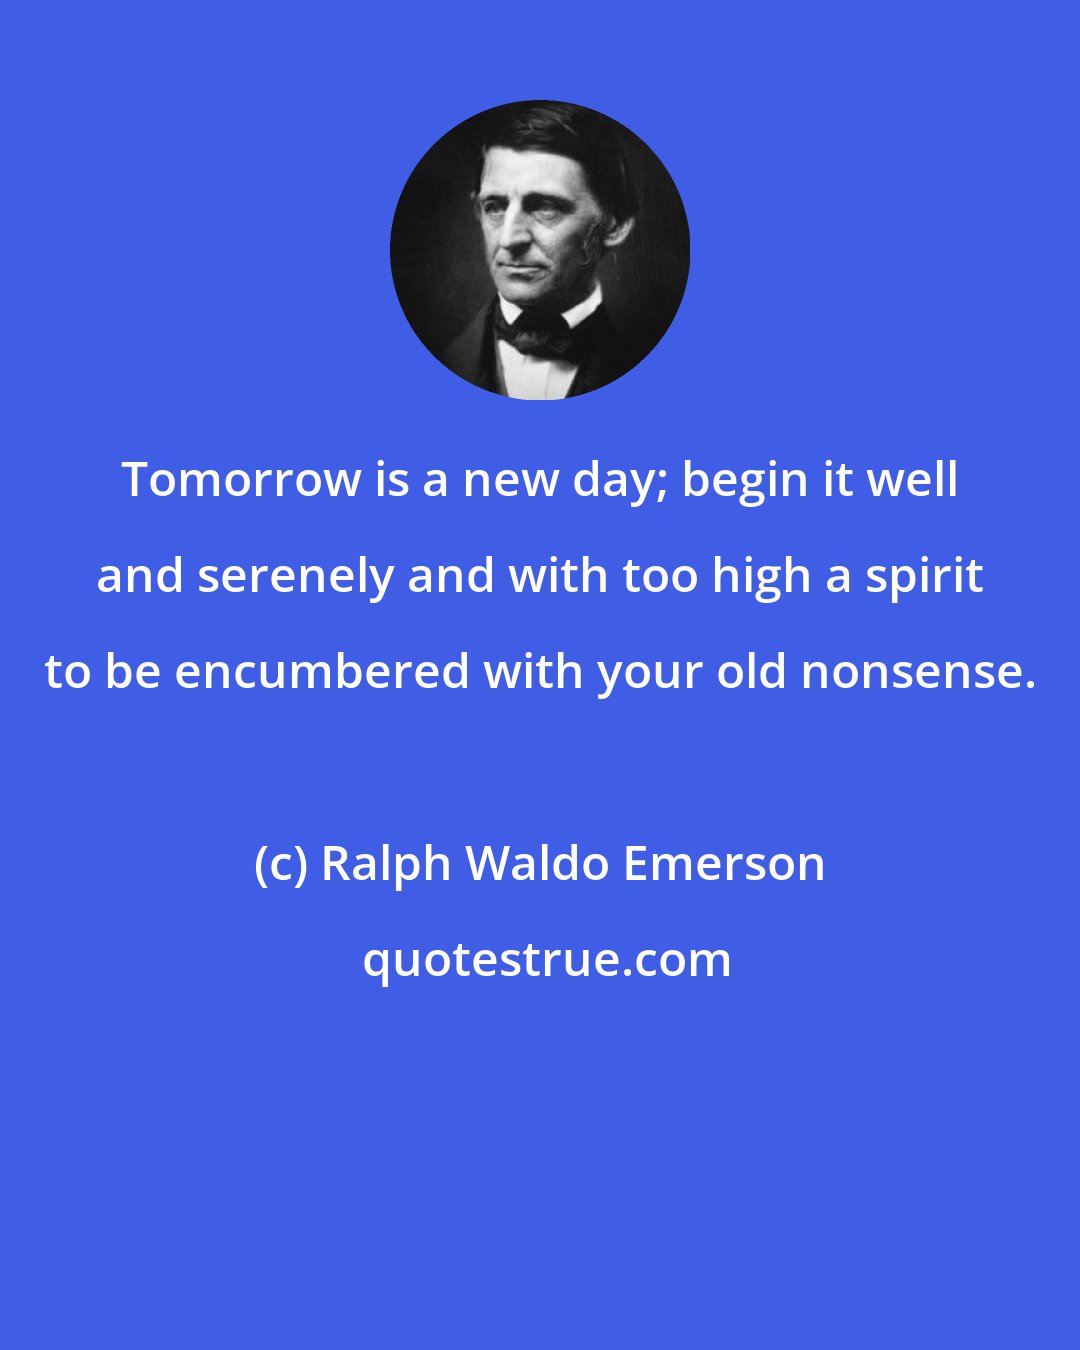 Ralph Waldo Emerson: Tomorrow is a new day; begin it well and serenely and with too high a spirit to be encumbered with your old nonsense.